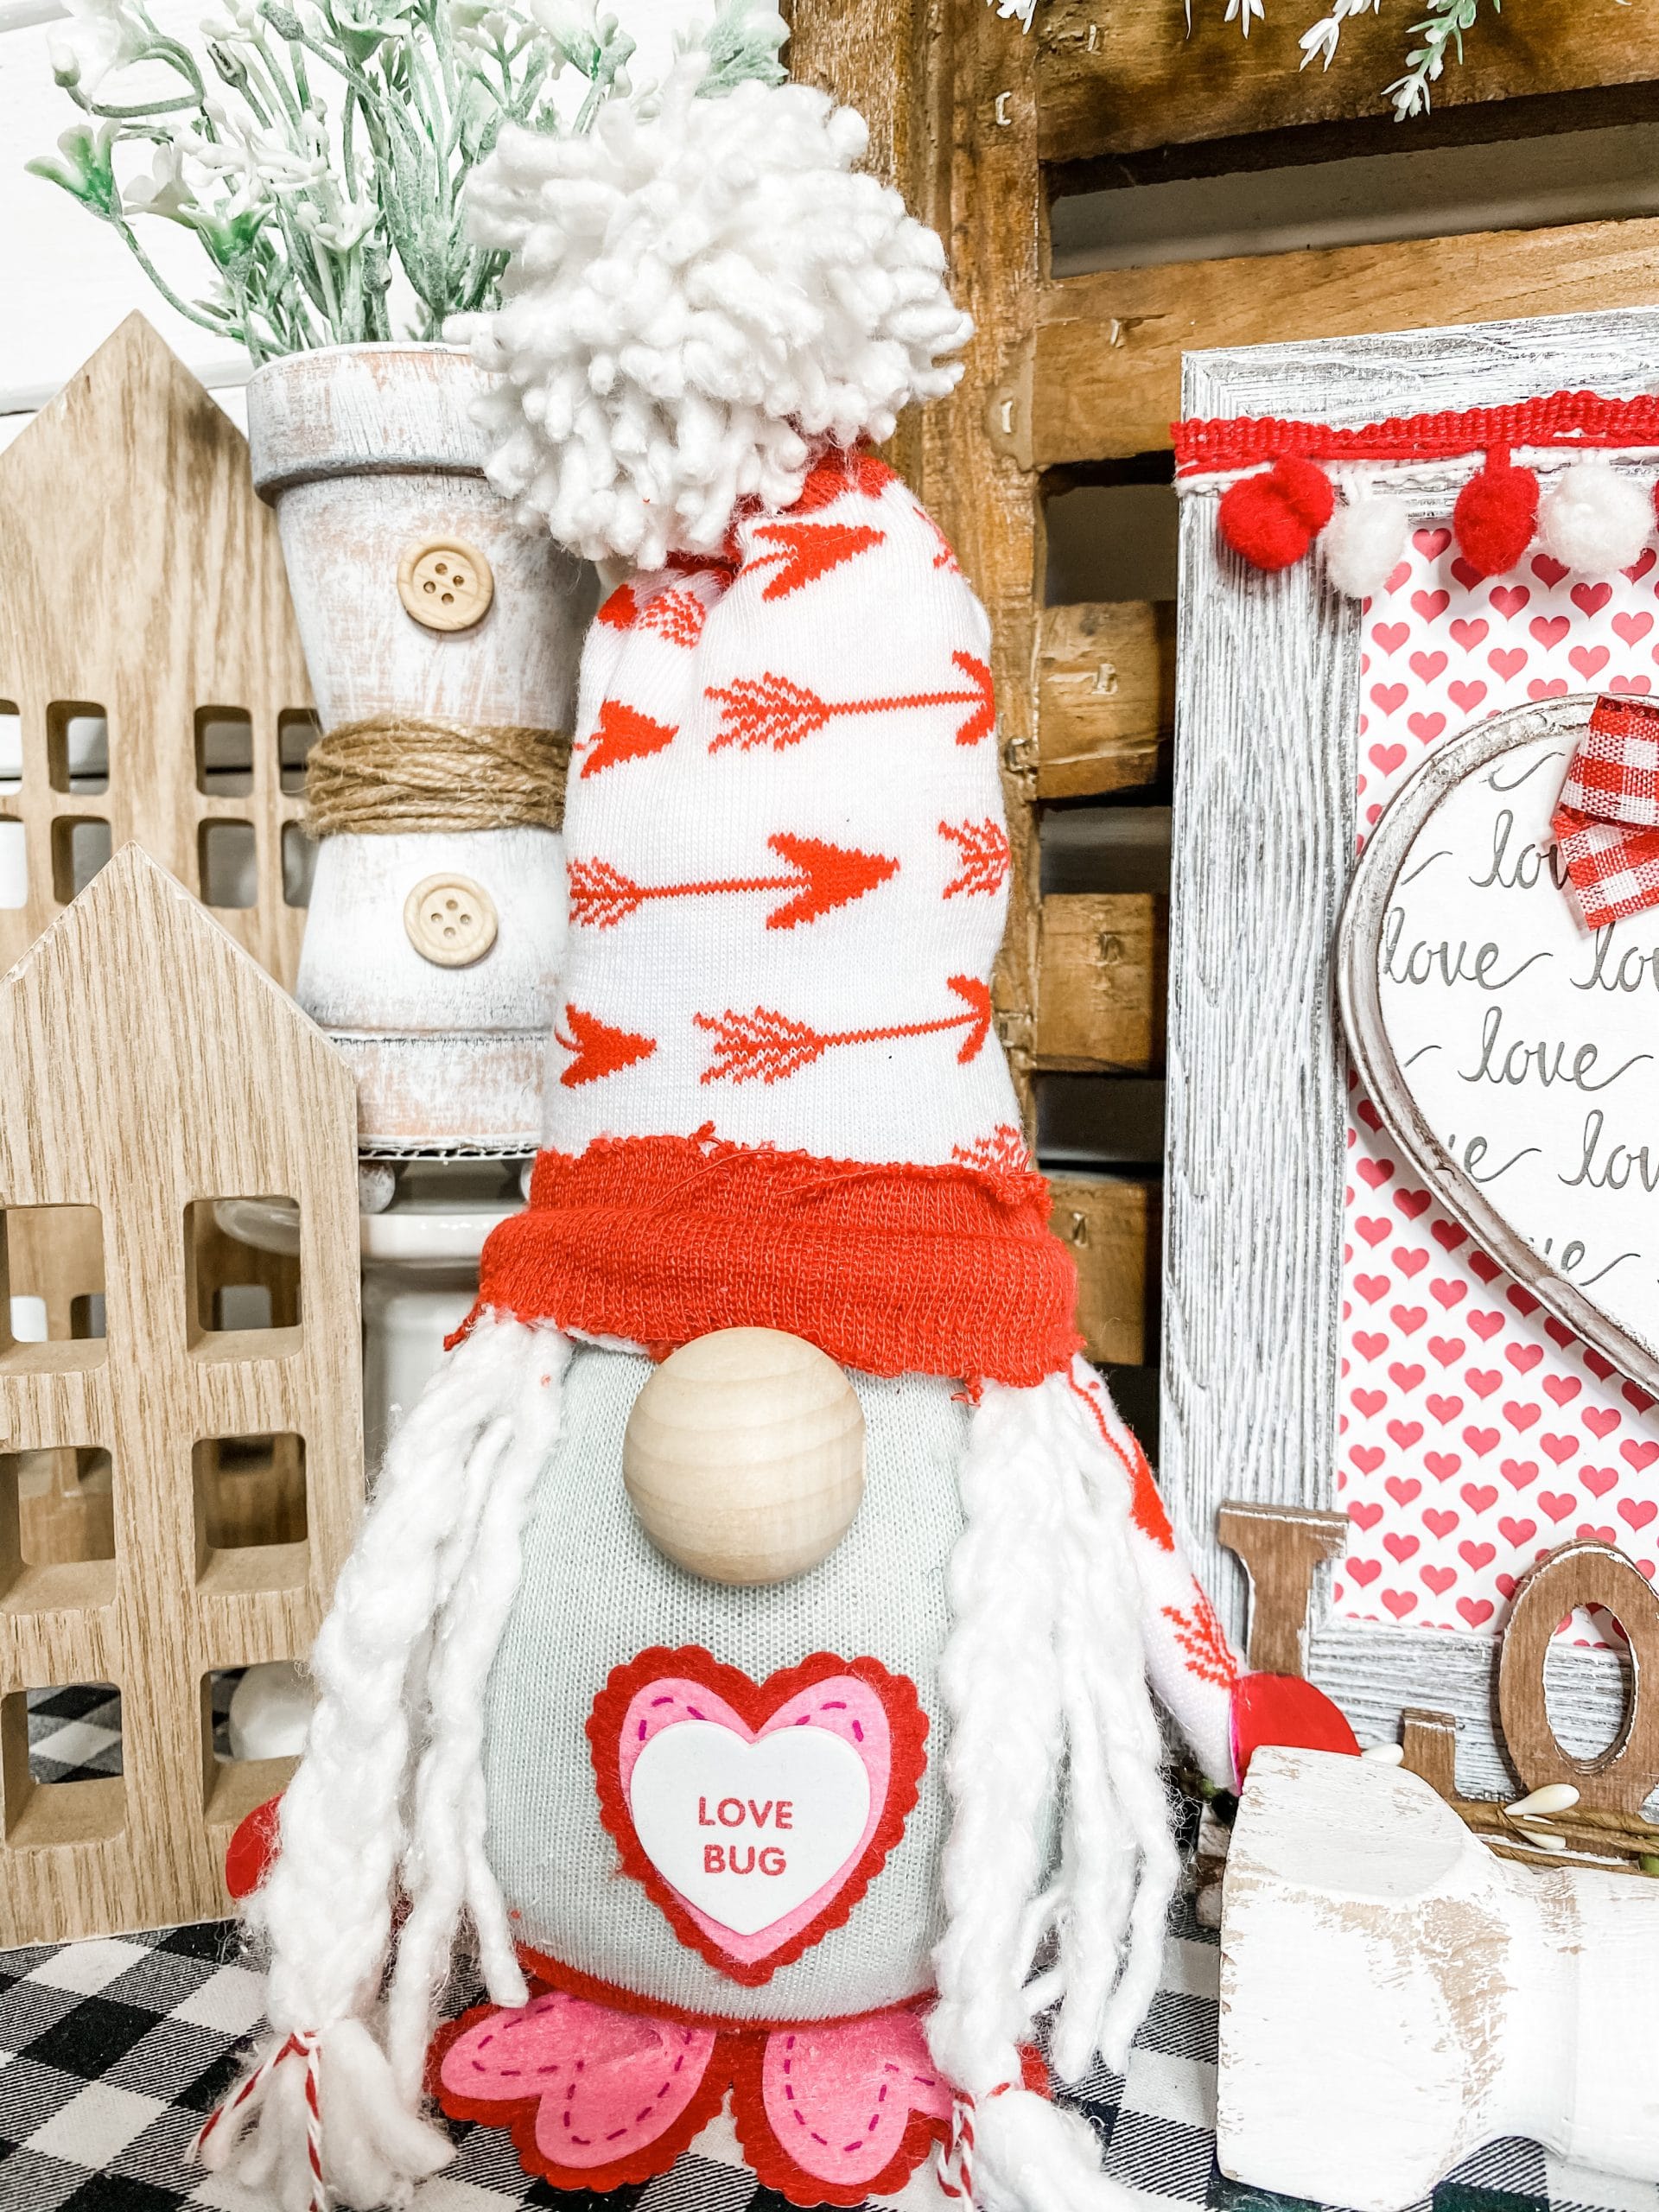 DIY Dollar Tree Mop and Sock Valentine's Day Gnome